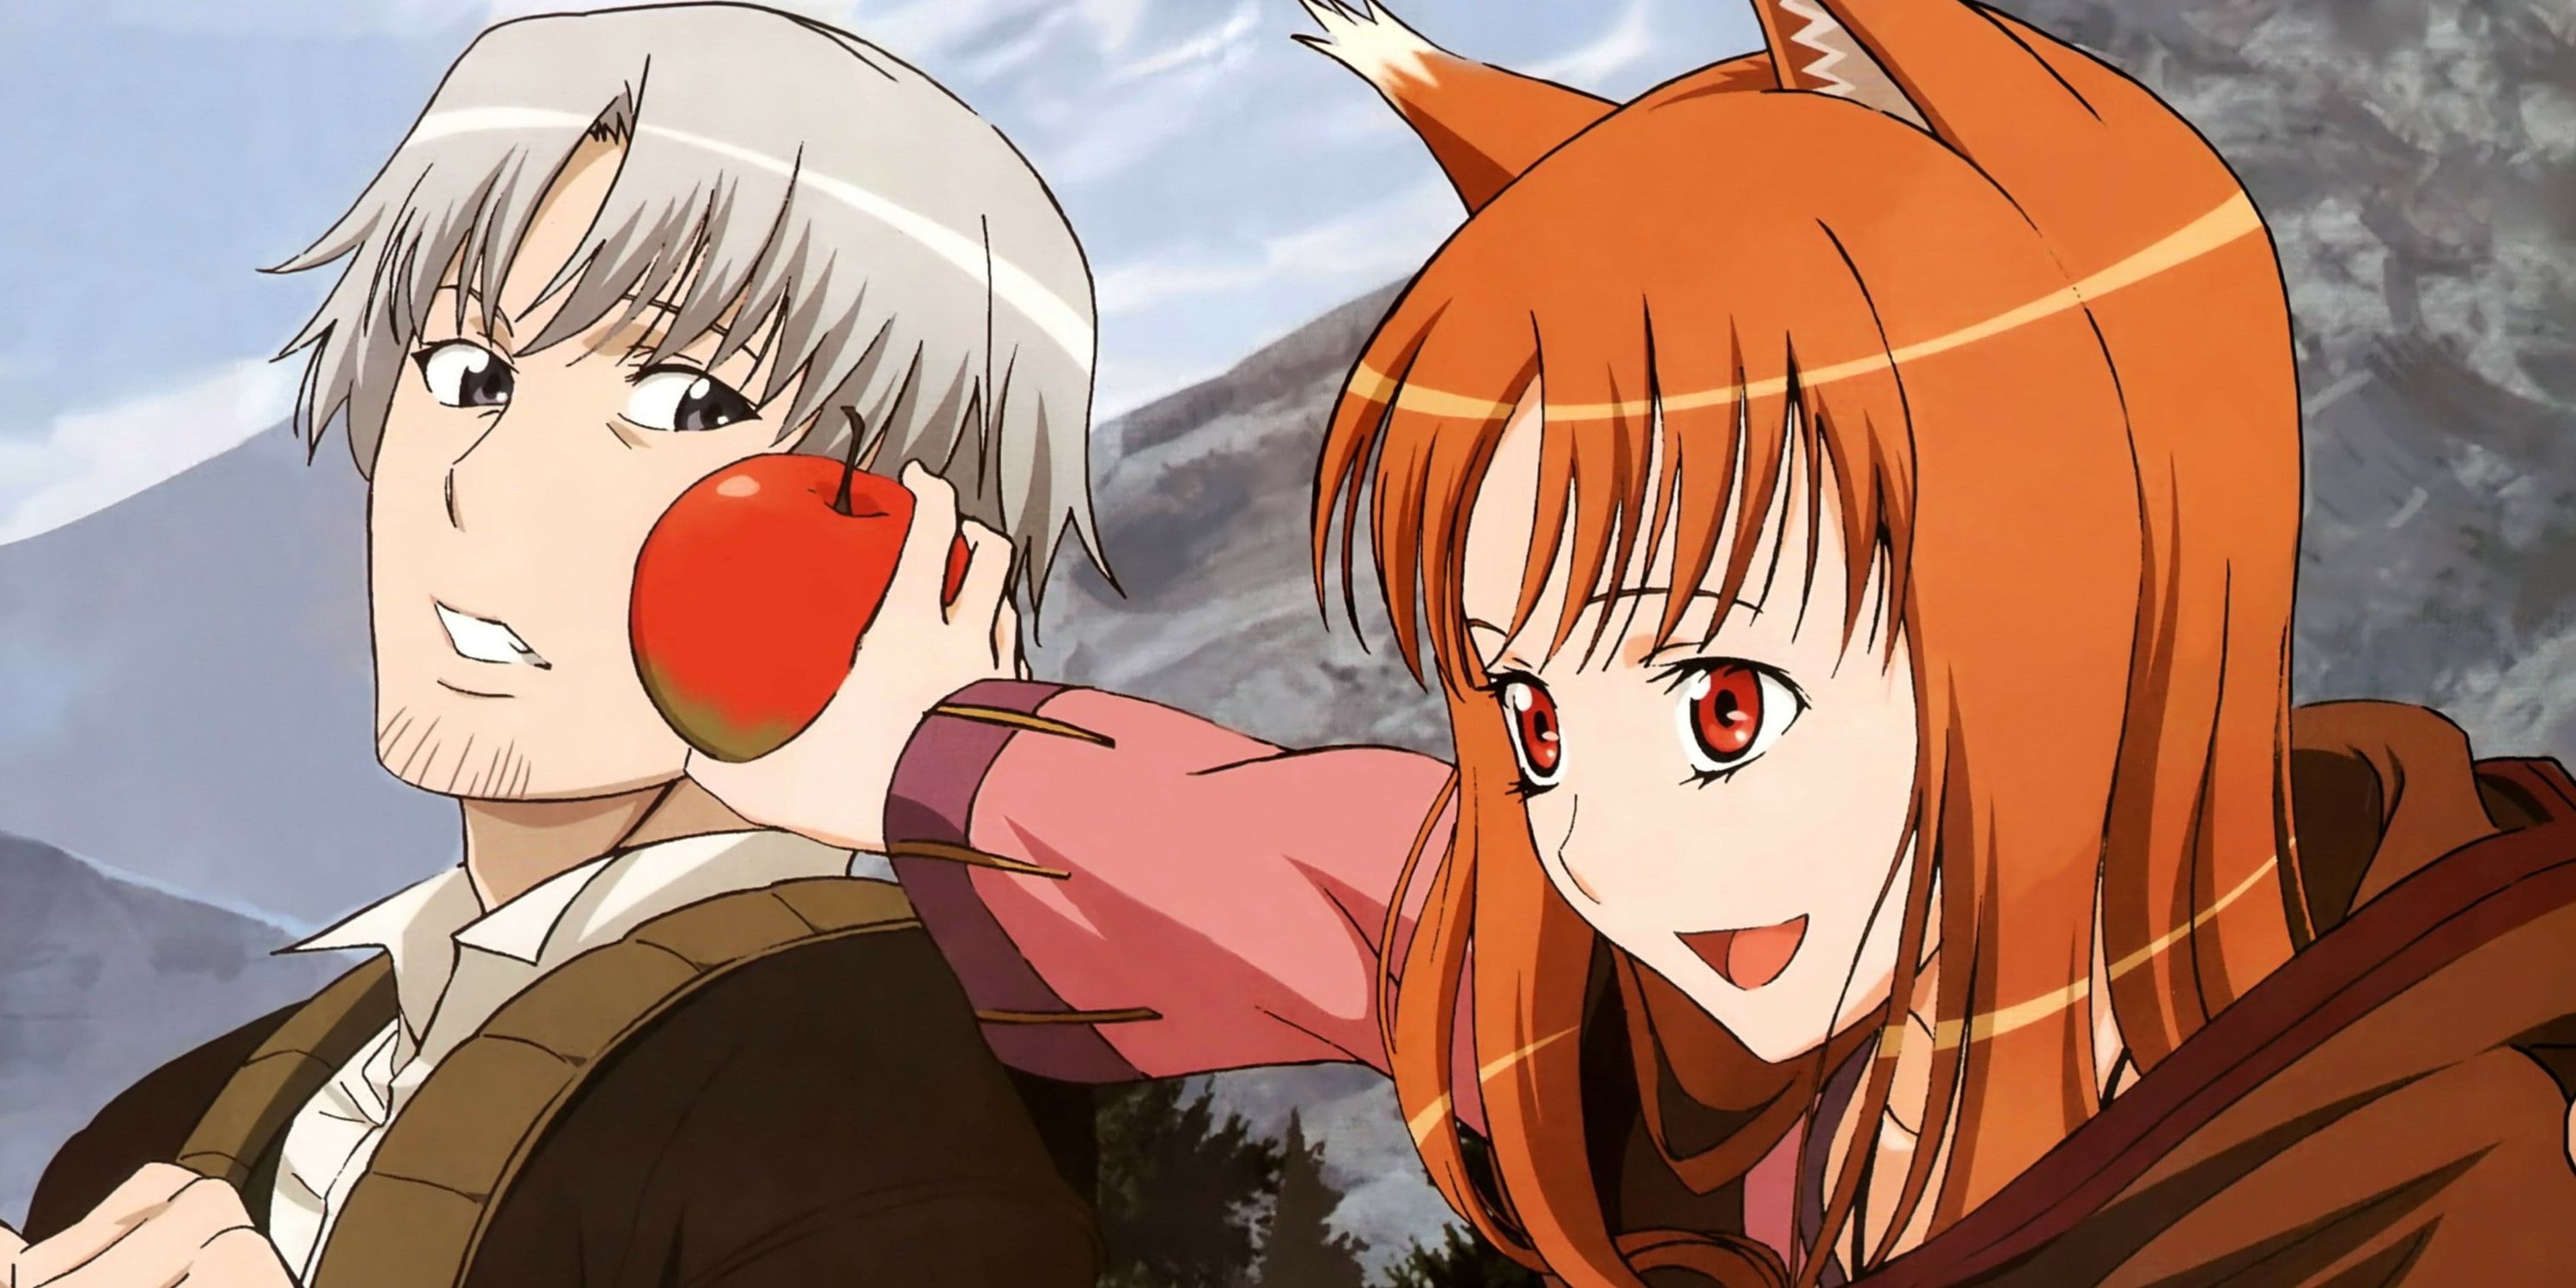 Spice & Wolf: Will the New Series Be a Continuation or Reboot?